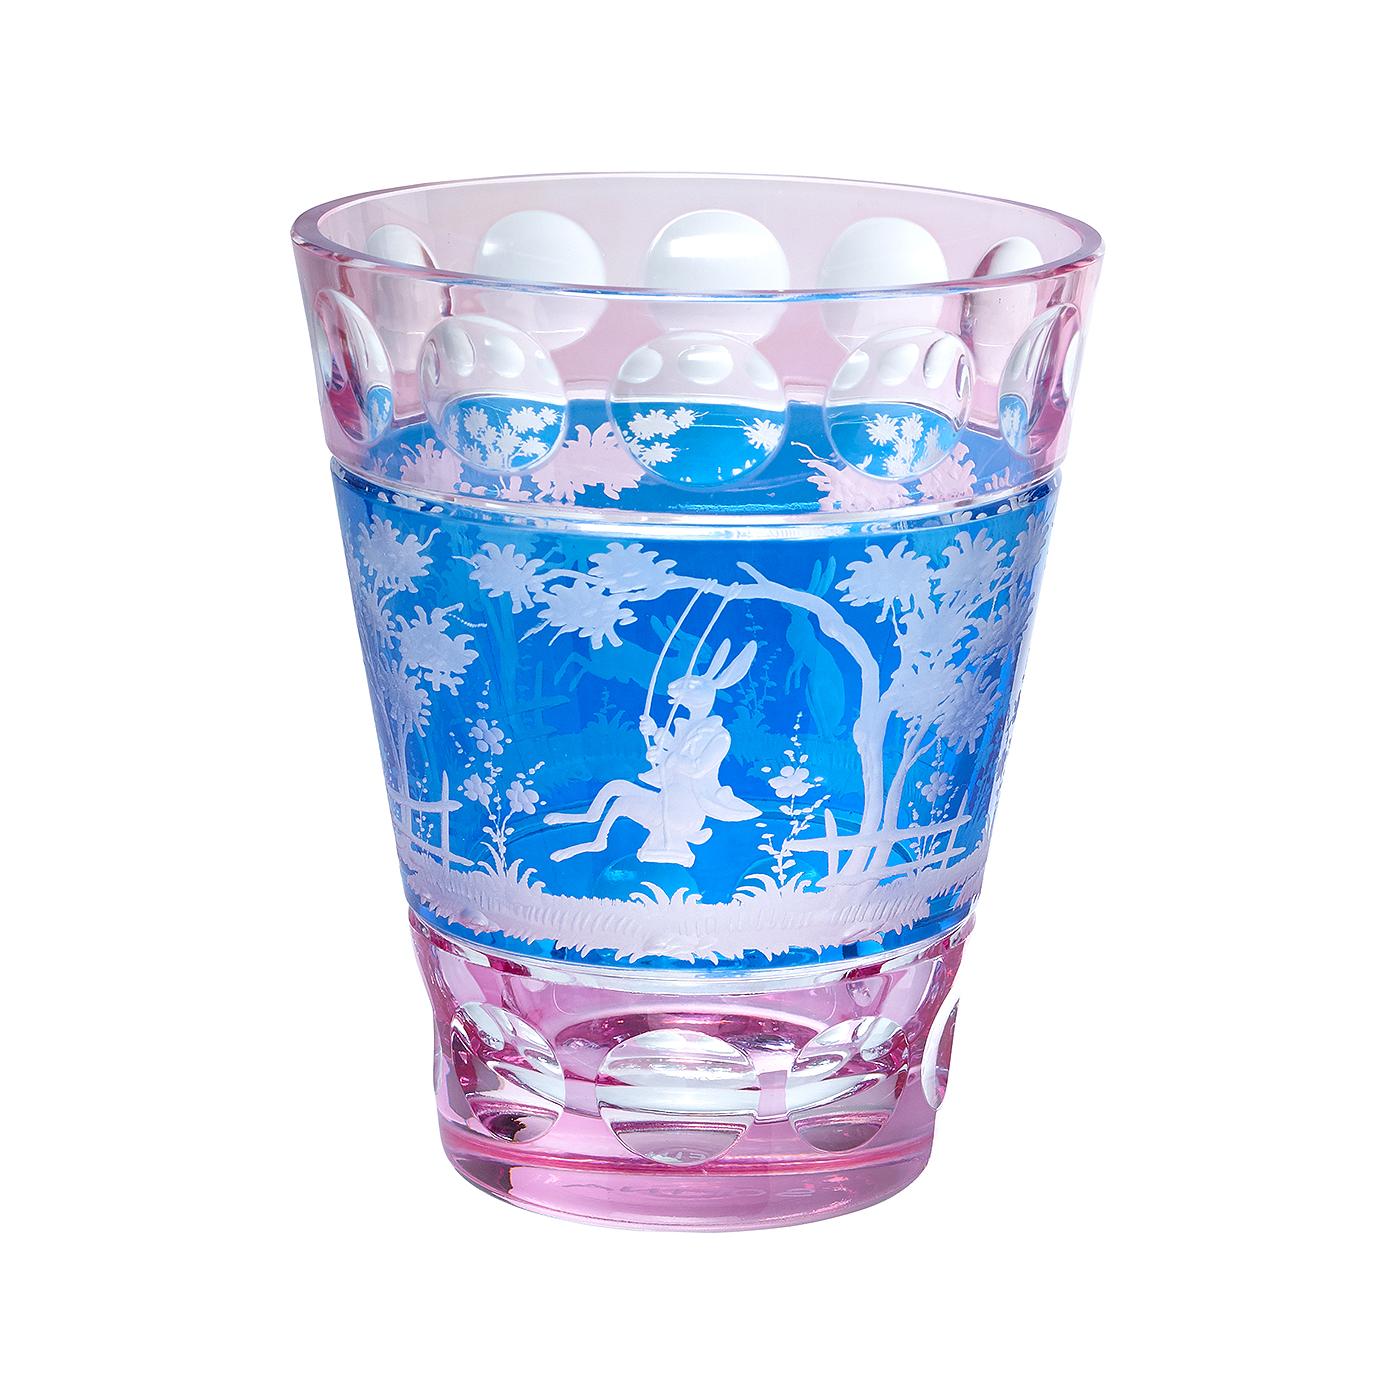 Hand blown crystal vase in pink and blue glass with a vintage Eastern scene. The decor is an Easter decor with 2 hands-free engraved bunnies in naturalistic style. Completely hand blown and hand-engraved in Bavaria/Germany. The glass here shown